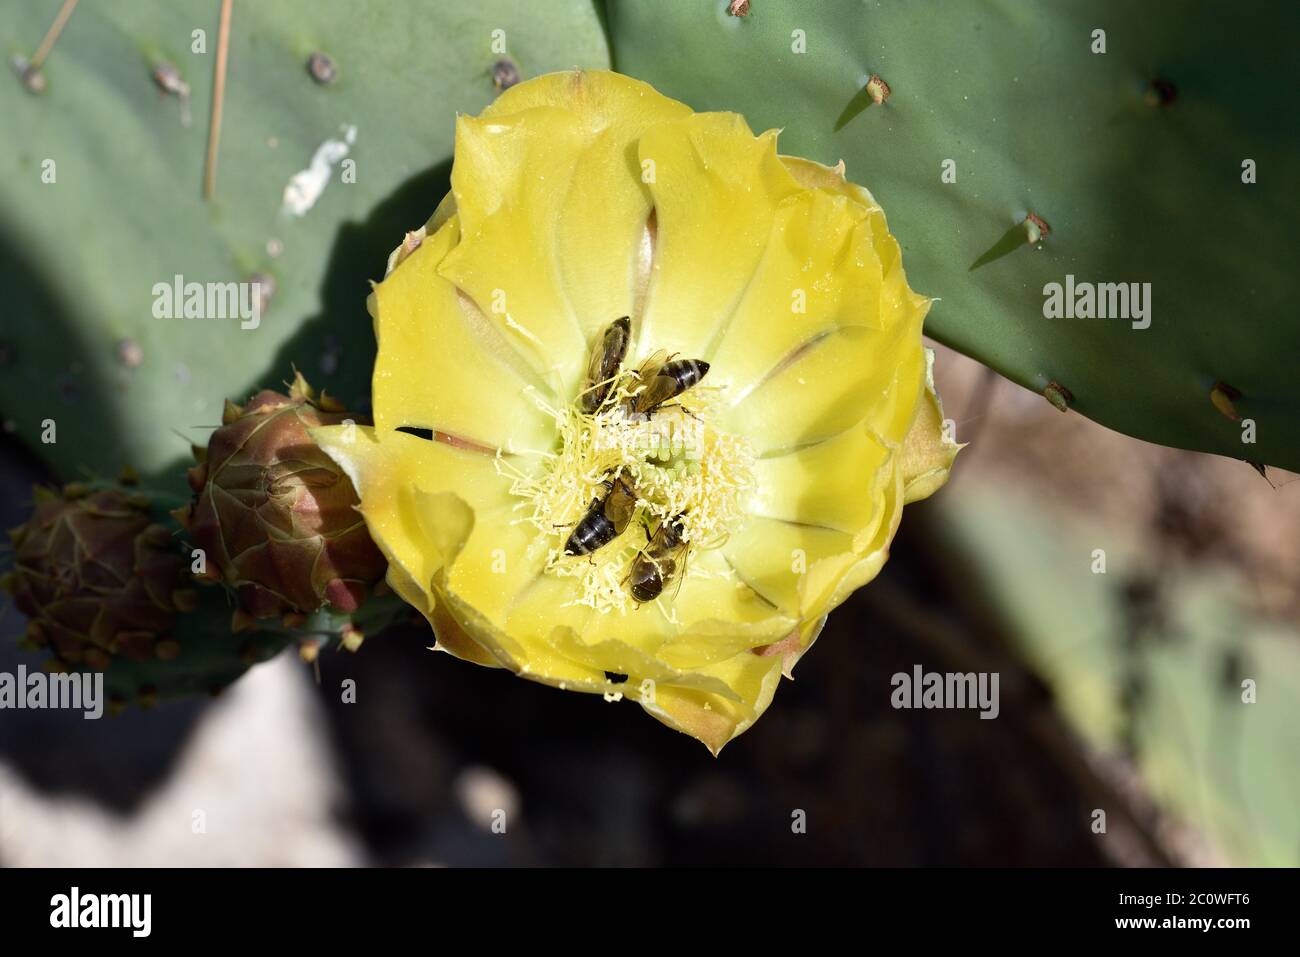 Cactus flower full of bees in Athens, Greece Stock Photo